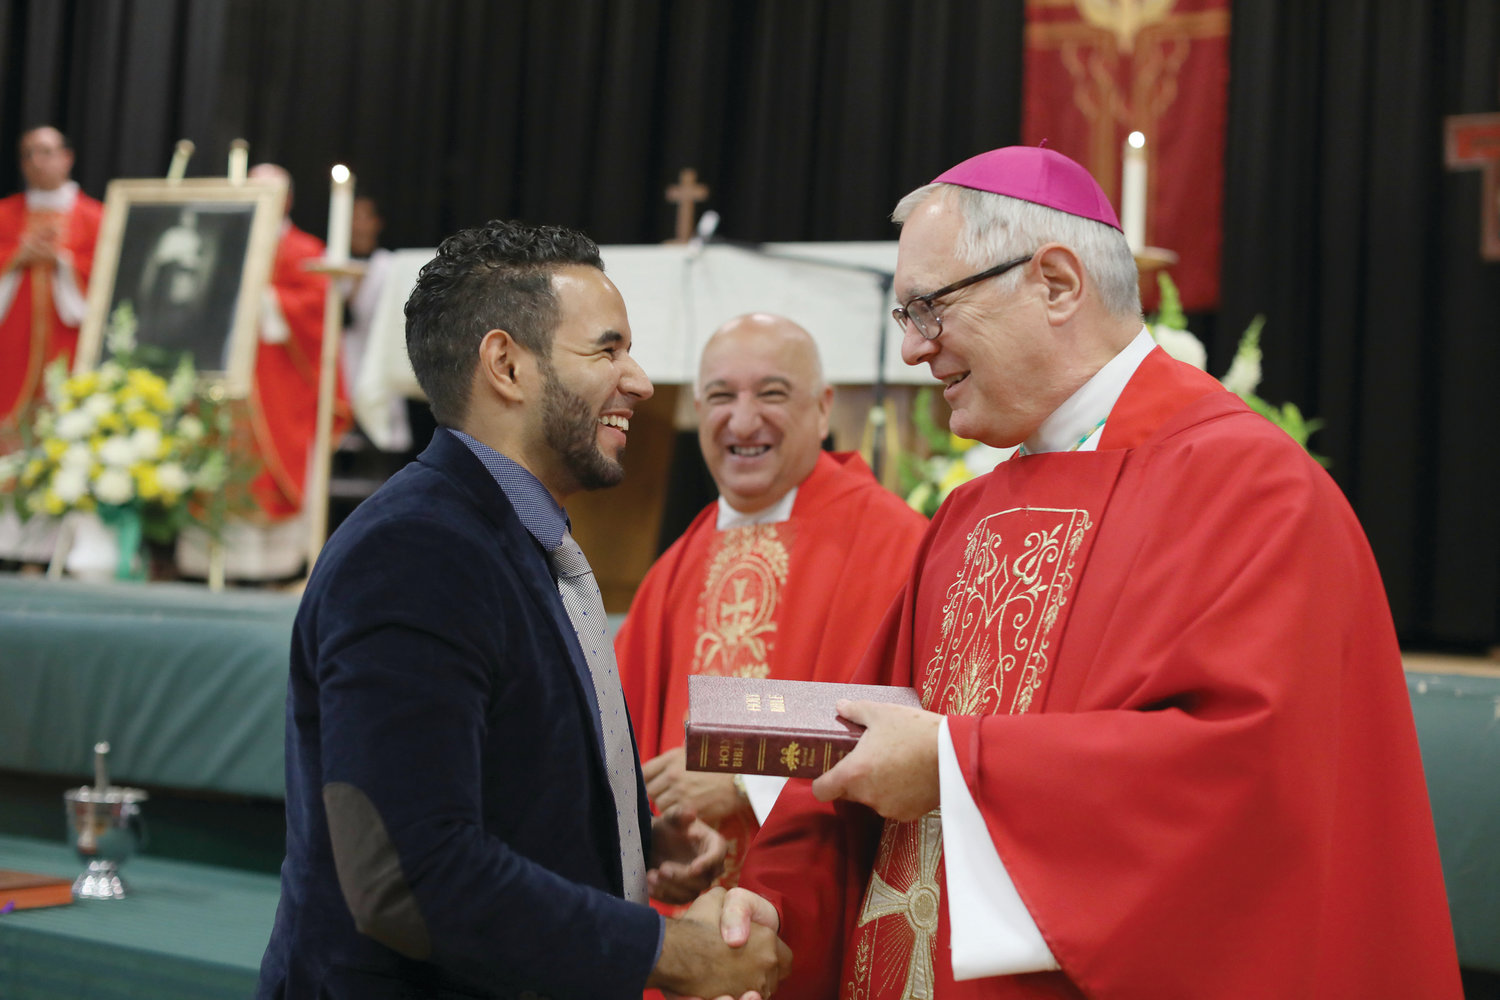 New teachers and faculty, as well as those celebrating special anniversaries at the school were honored by Bishop Tobin and Father Robert L. Marciano, president of Bishop Hendricken. Above, at right new school counselor and theology teacher Billy Burdier recieves a Bible from Bishop Tobin.